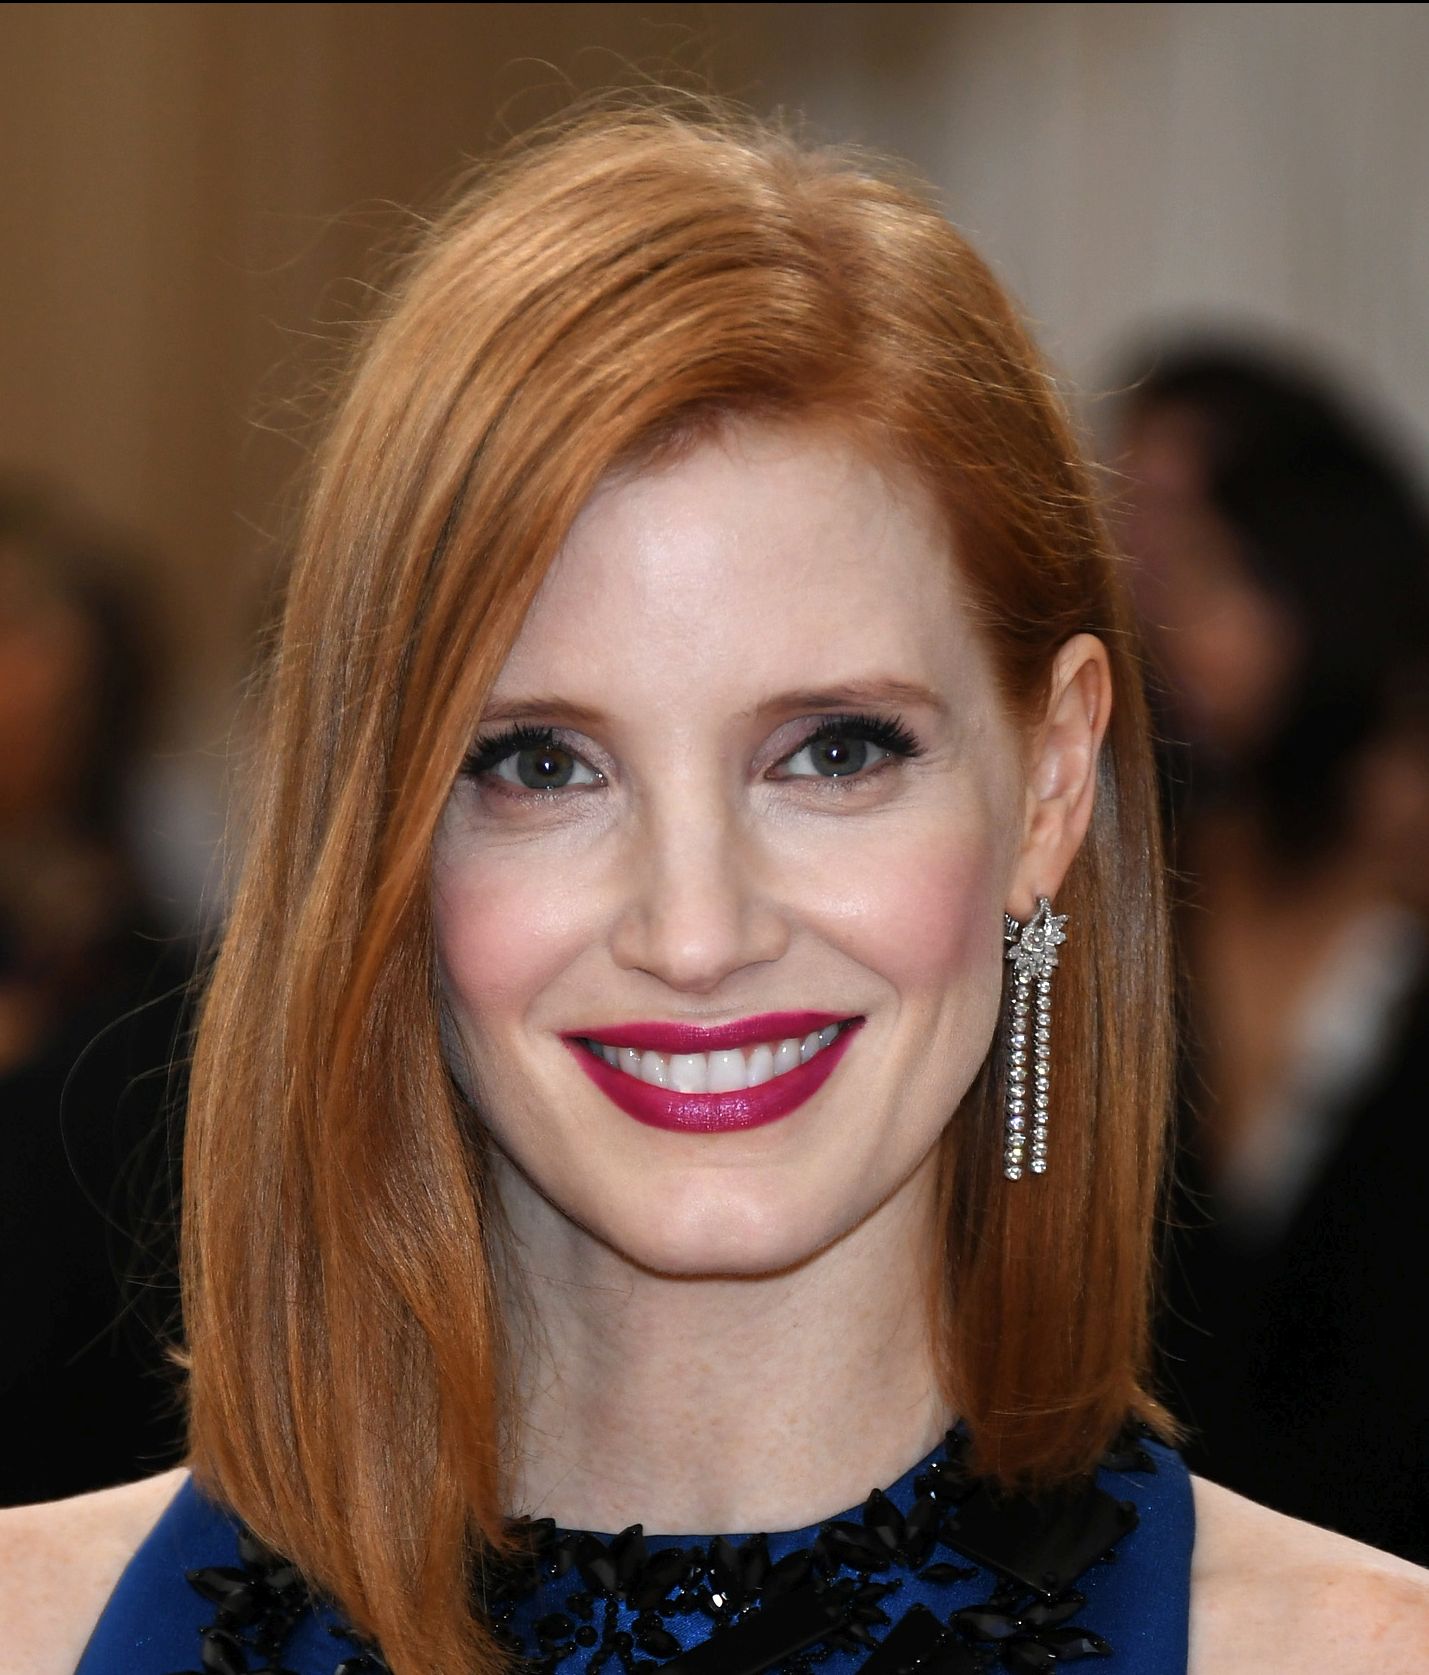 NEW YORK, NY - MAY 02:  Jessica Chastain attends the "Manus x Machina: Fashion In An Age Of Technology" Costume Institute Gala at Metropolitan Museum of Art on May 2, 2016 in New York City.  (Photo by Larry Busacca/Getty Images)